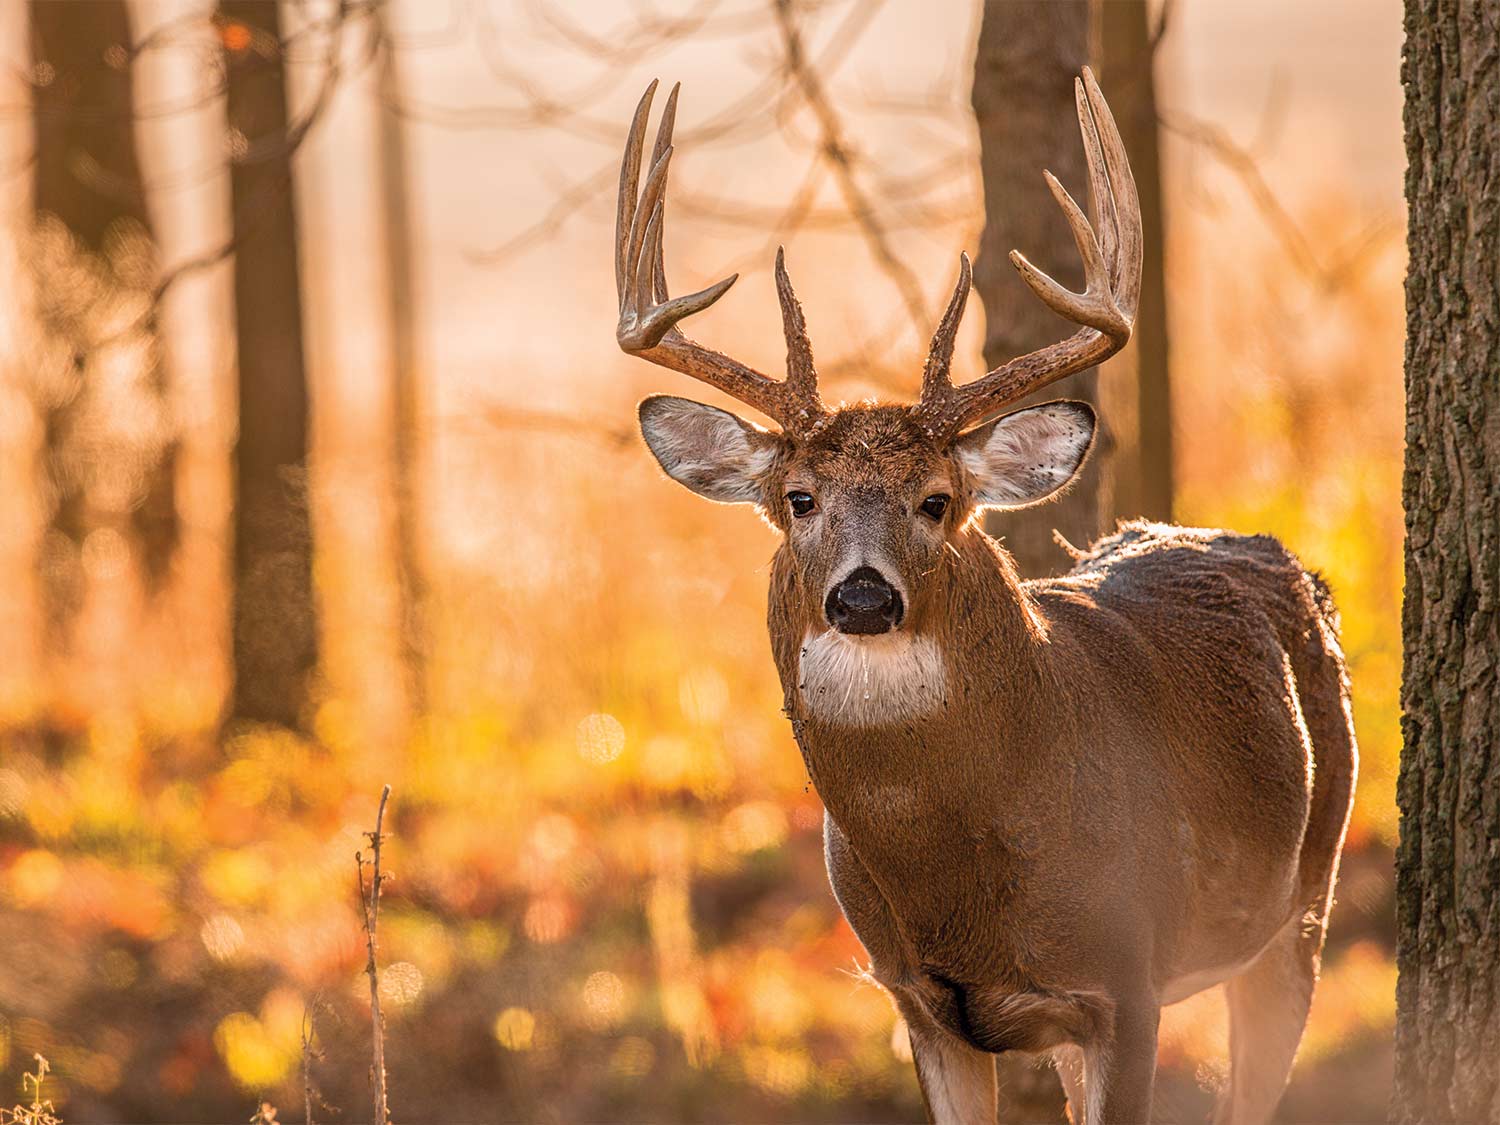 A whitetail deer stands in a large open woods with the sun setting in the evening.